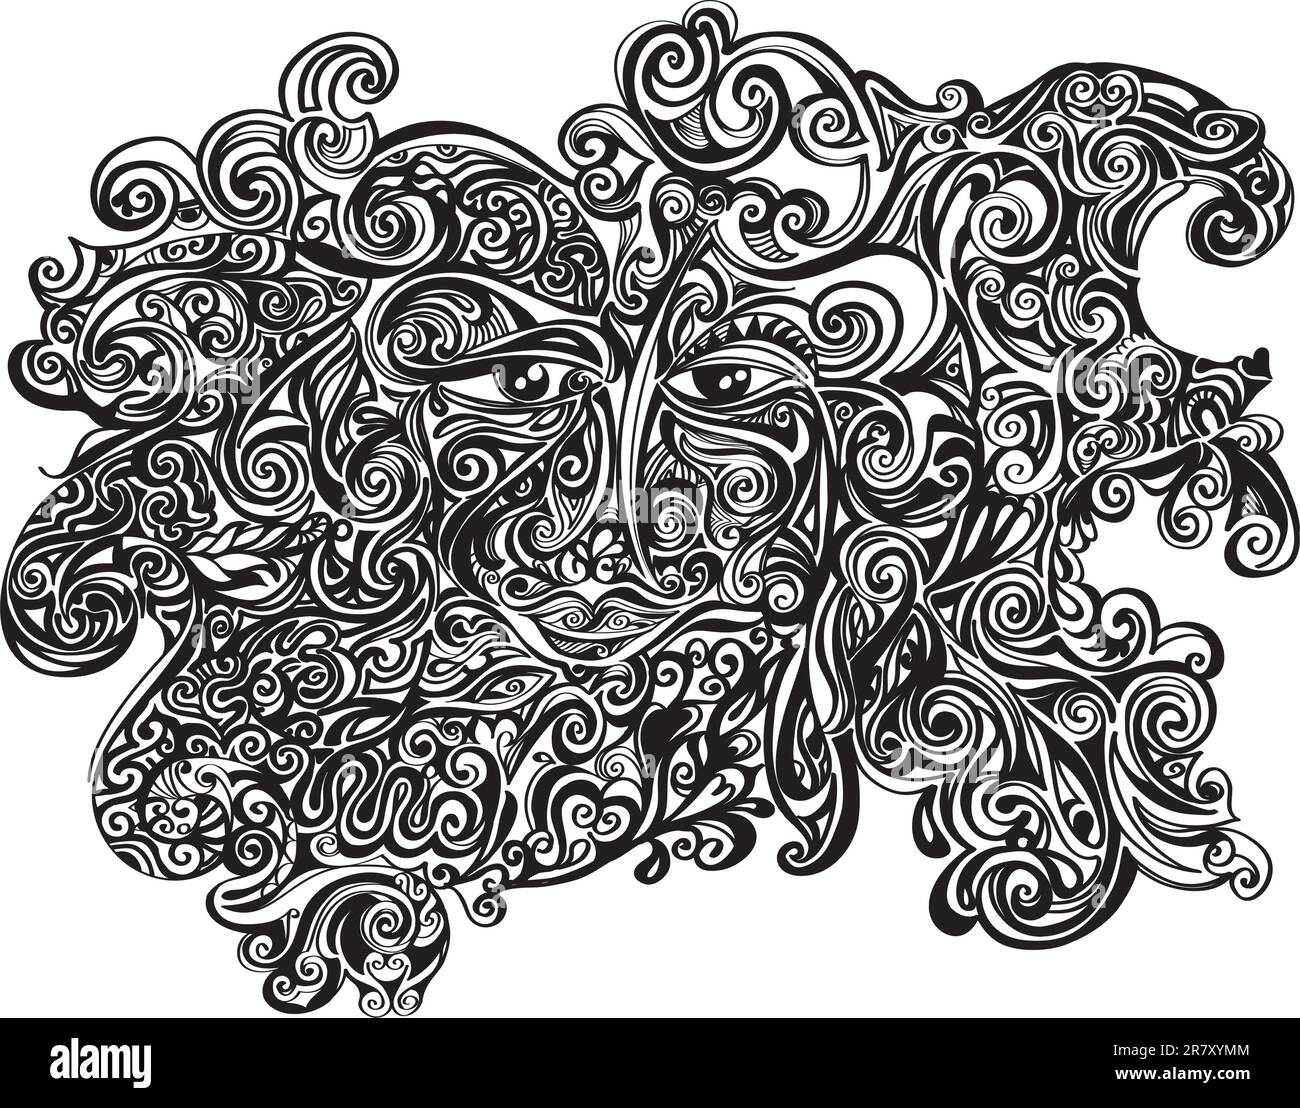 Black and white illustration of a very detailed decorated face Stock Vector